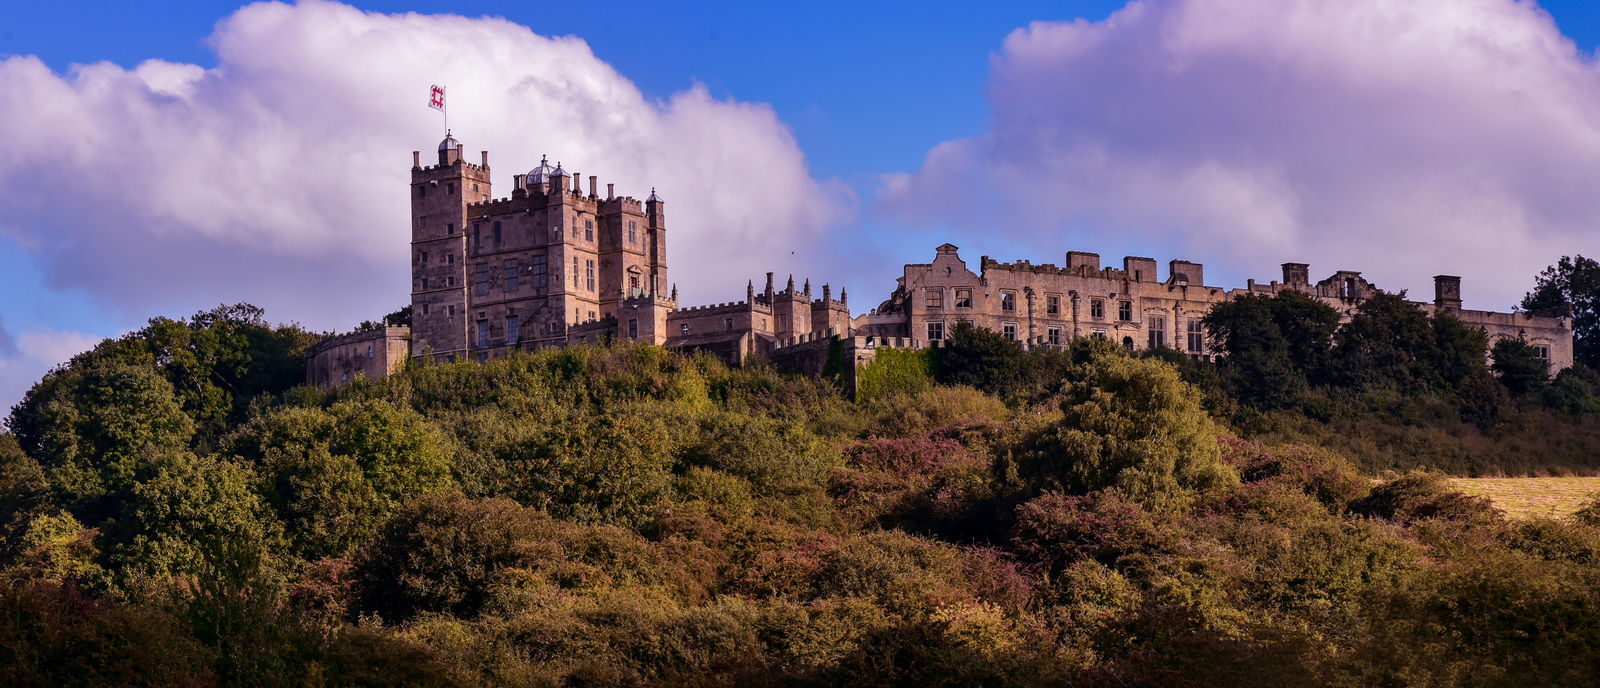 Discover England's Best Castle Hotels